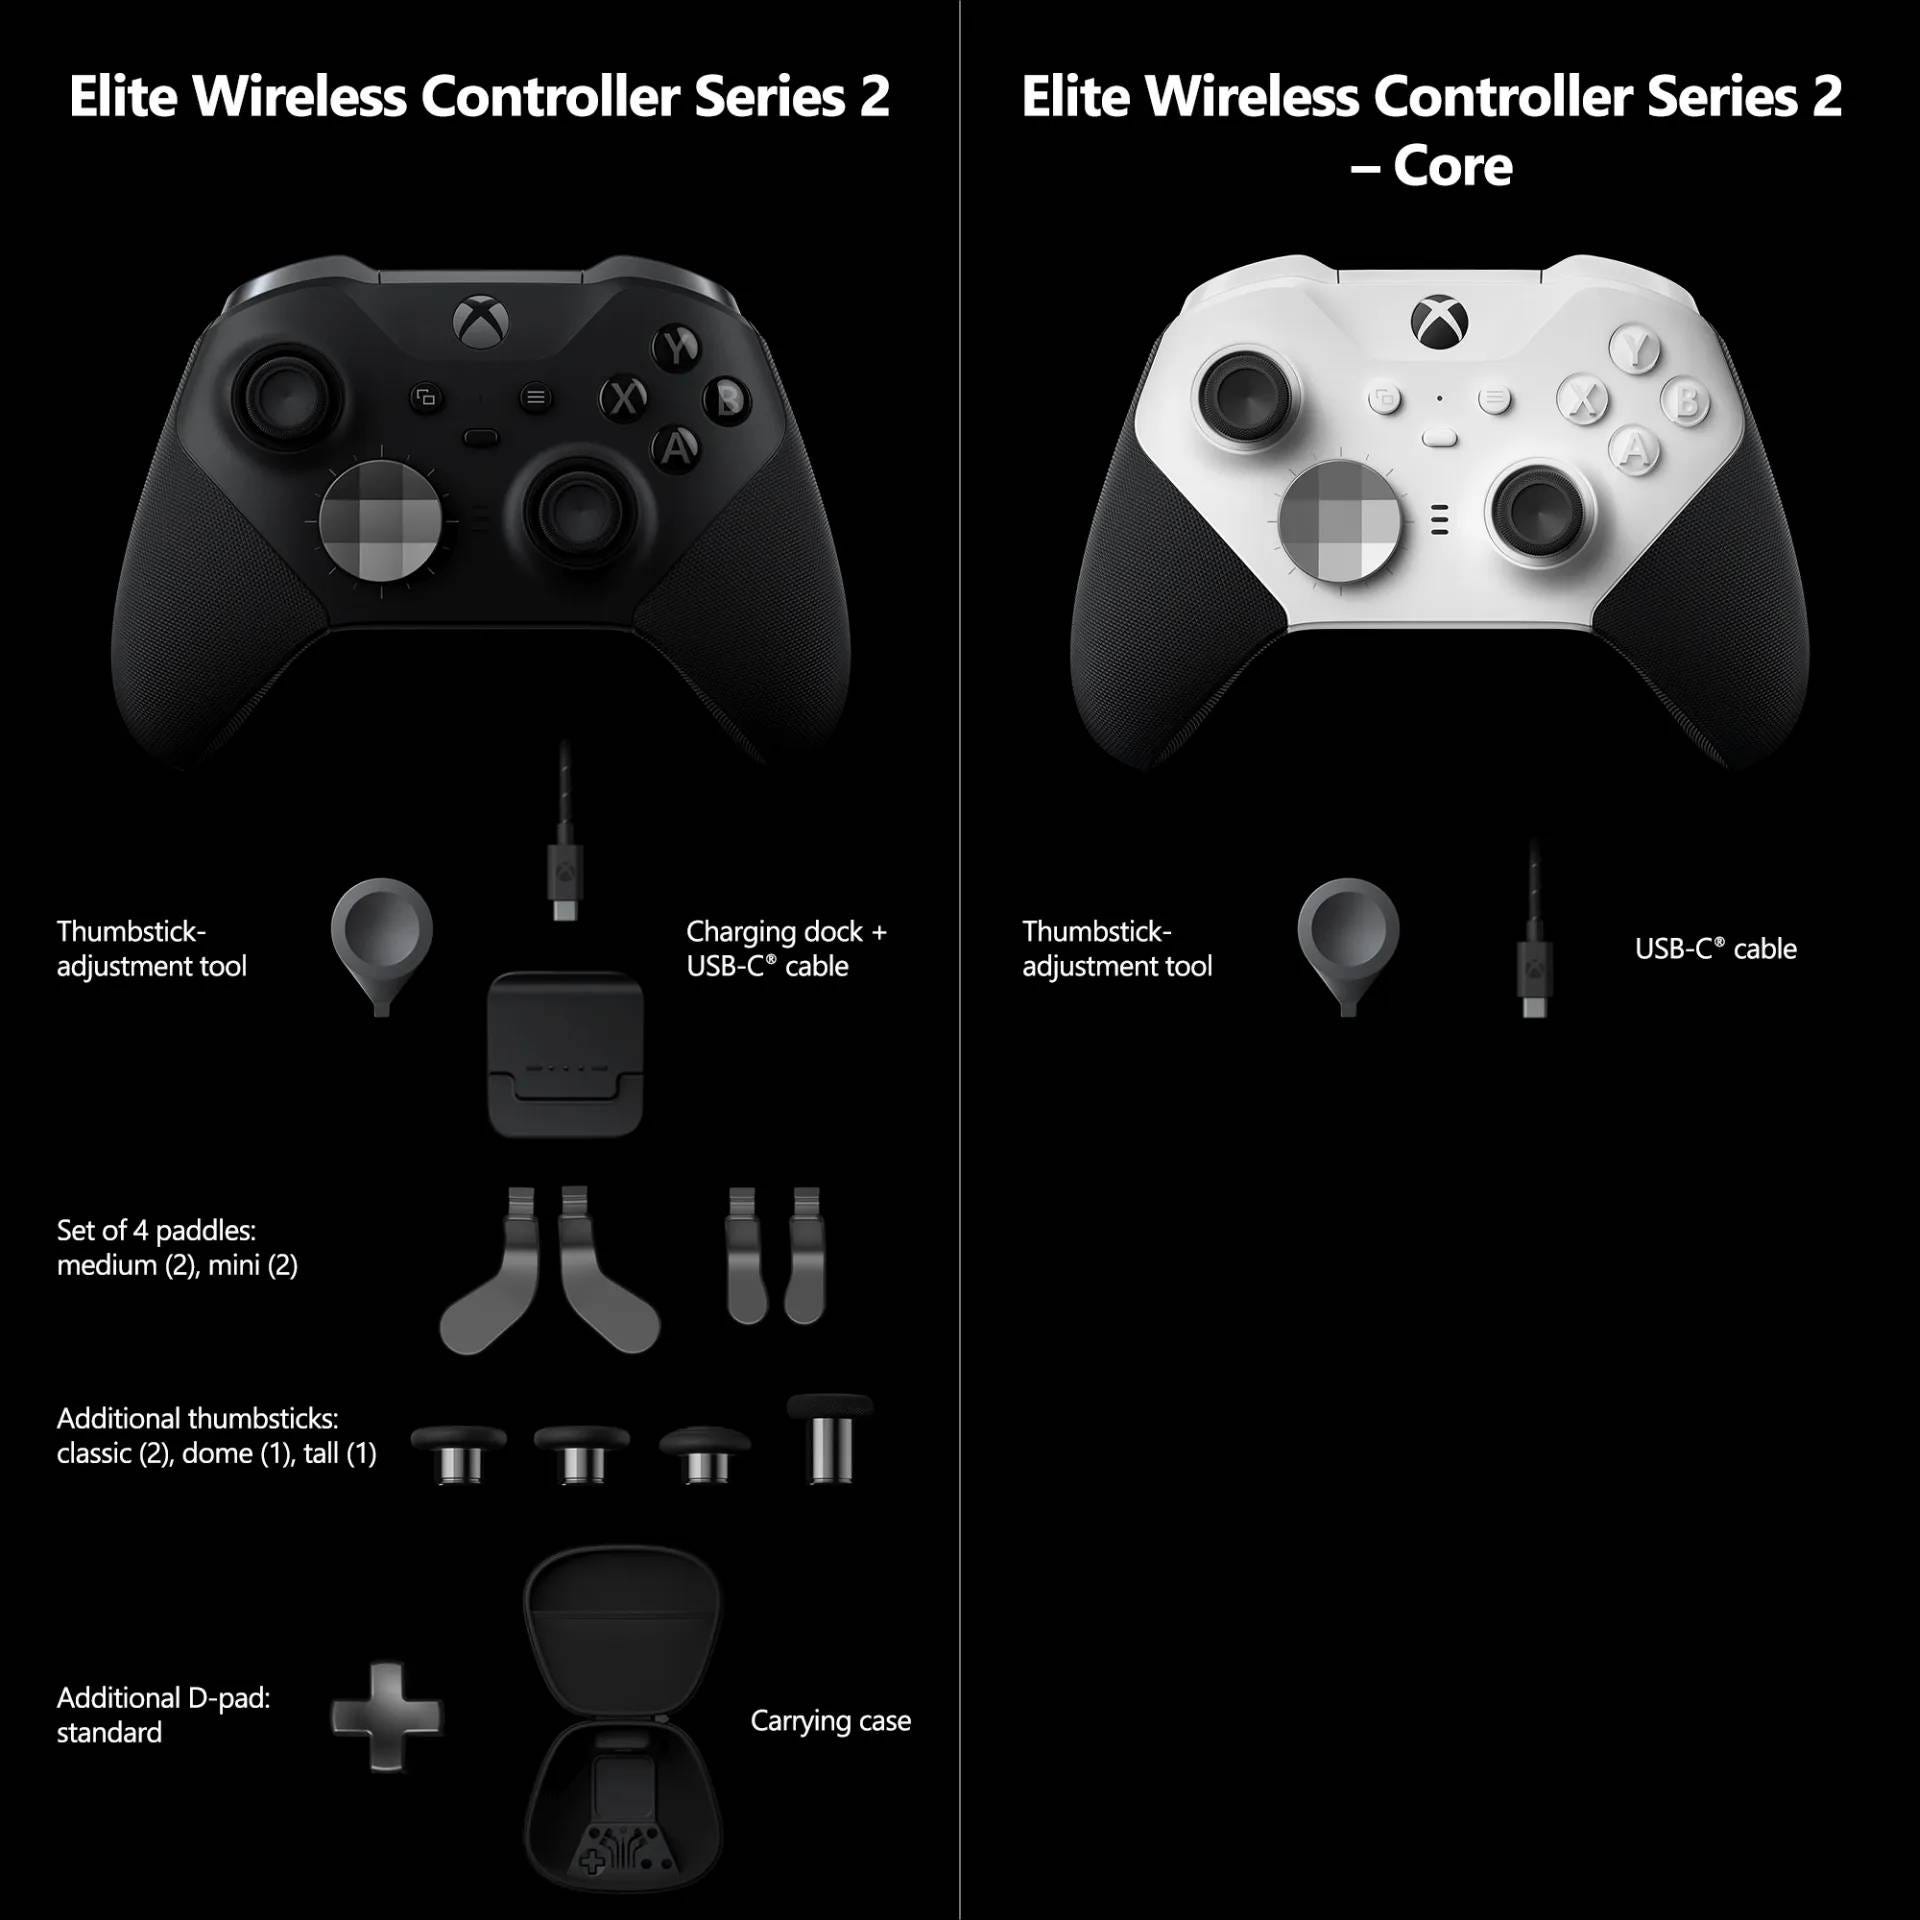 The Xbox Elite Series 2 Core Controller is a cheaper version of